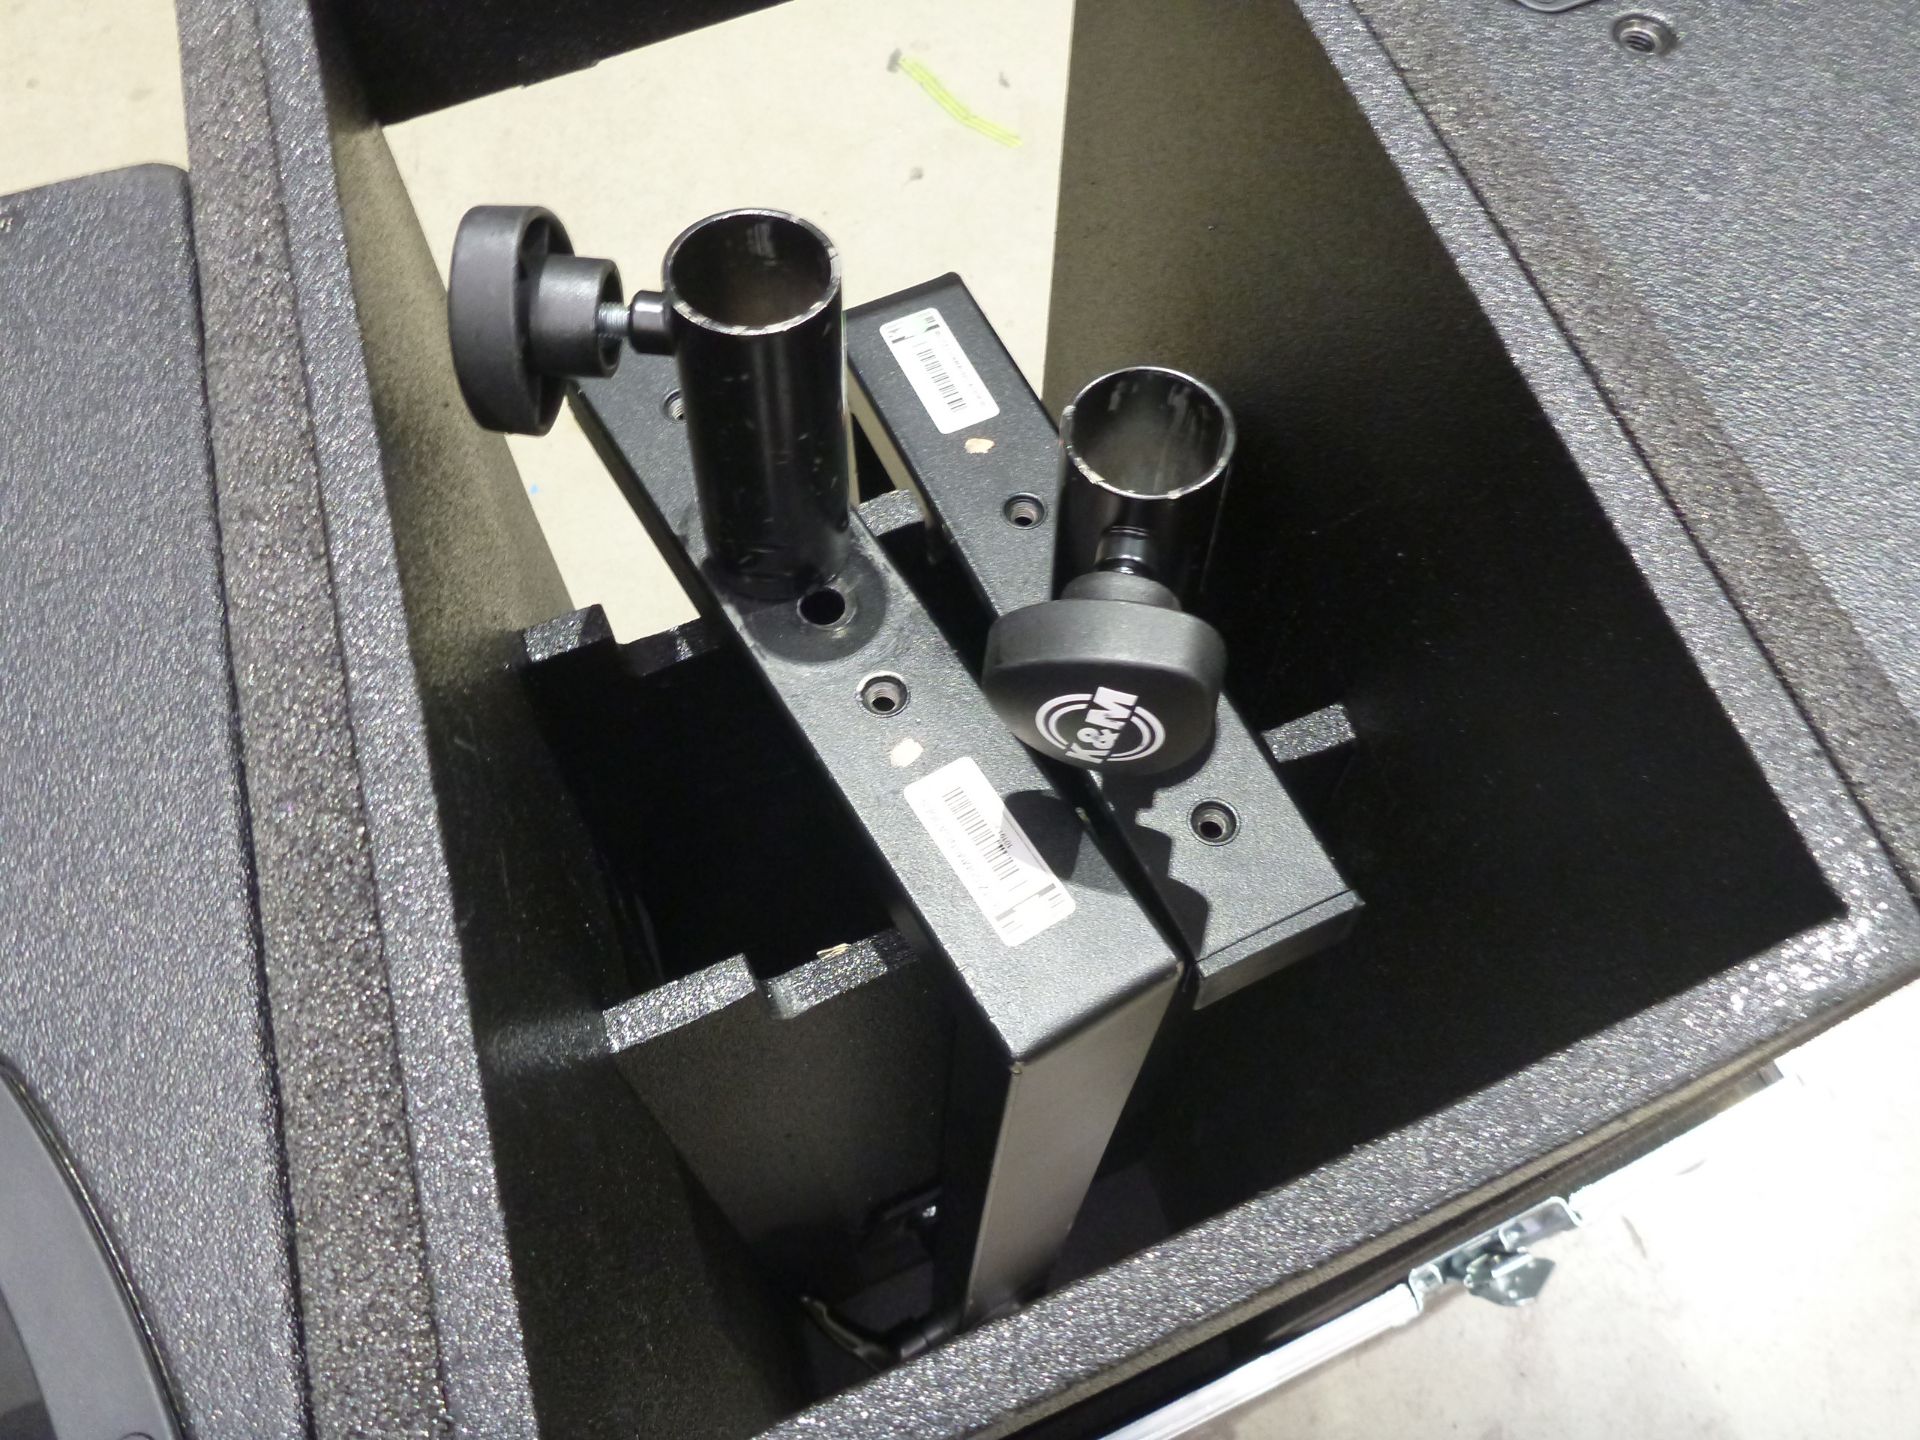 D & B Audiotecknik Y7P Loudspeakers (Pair) In flight case with flying frame, top hat and safety - Image 6 of 7